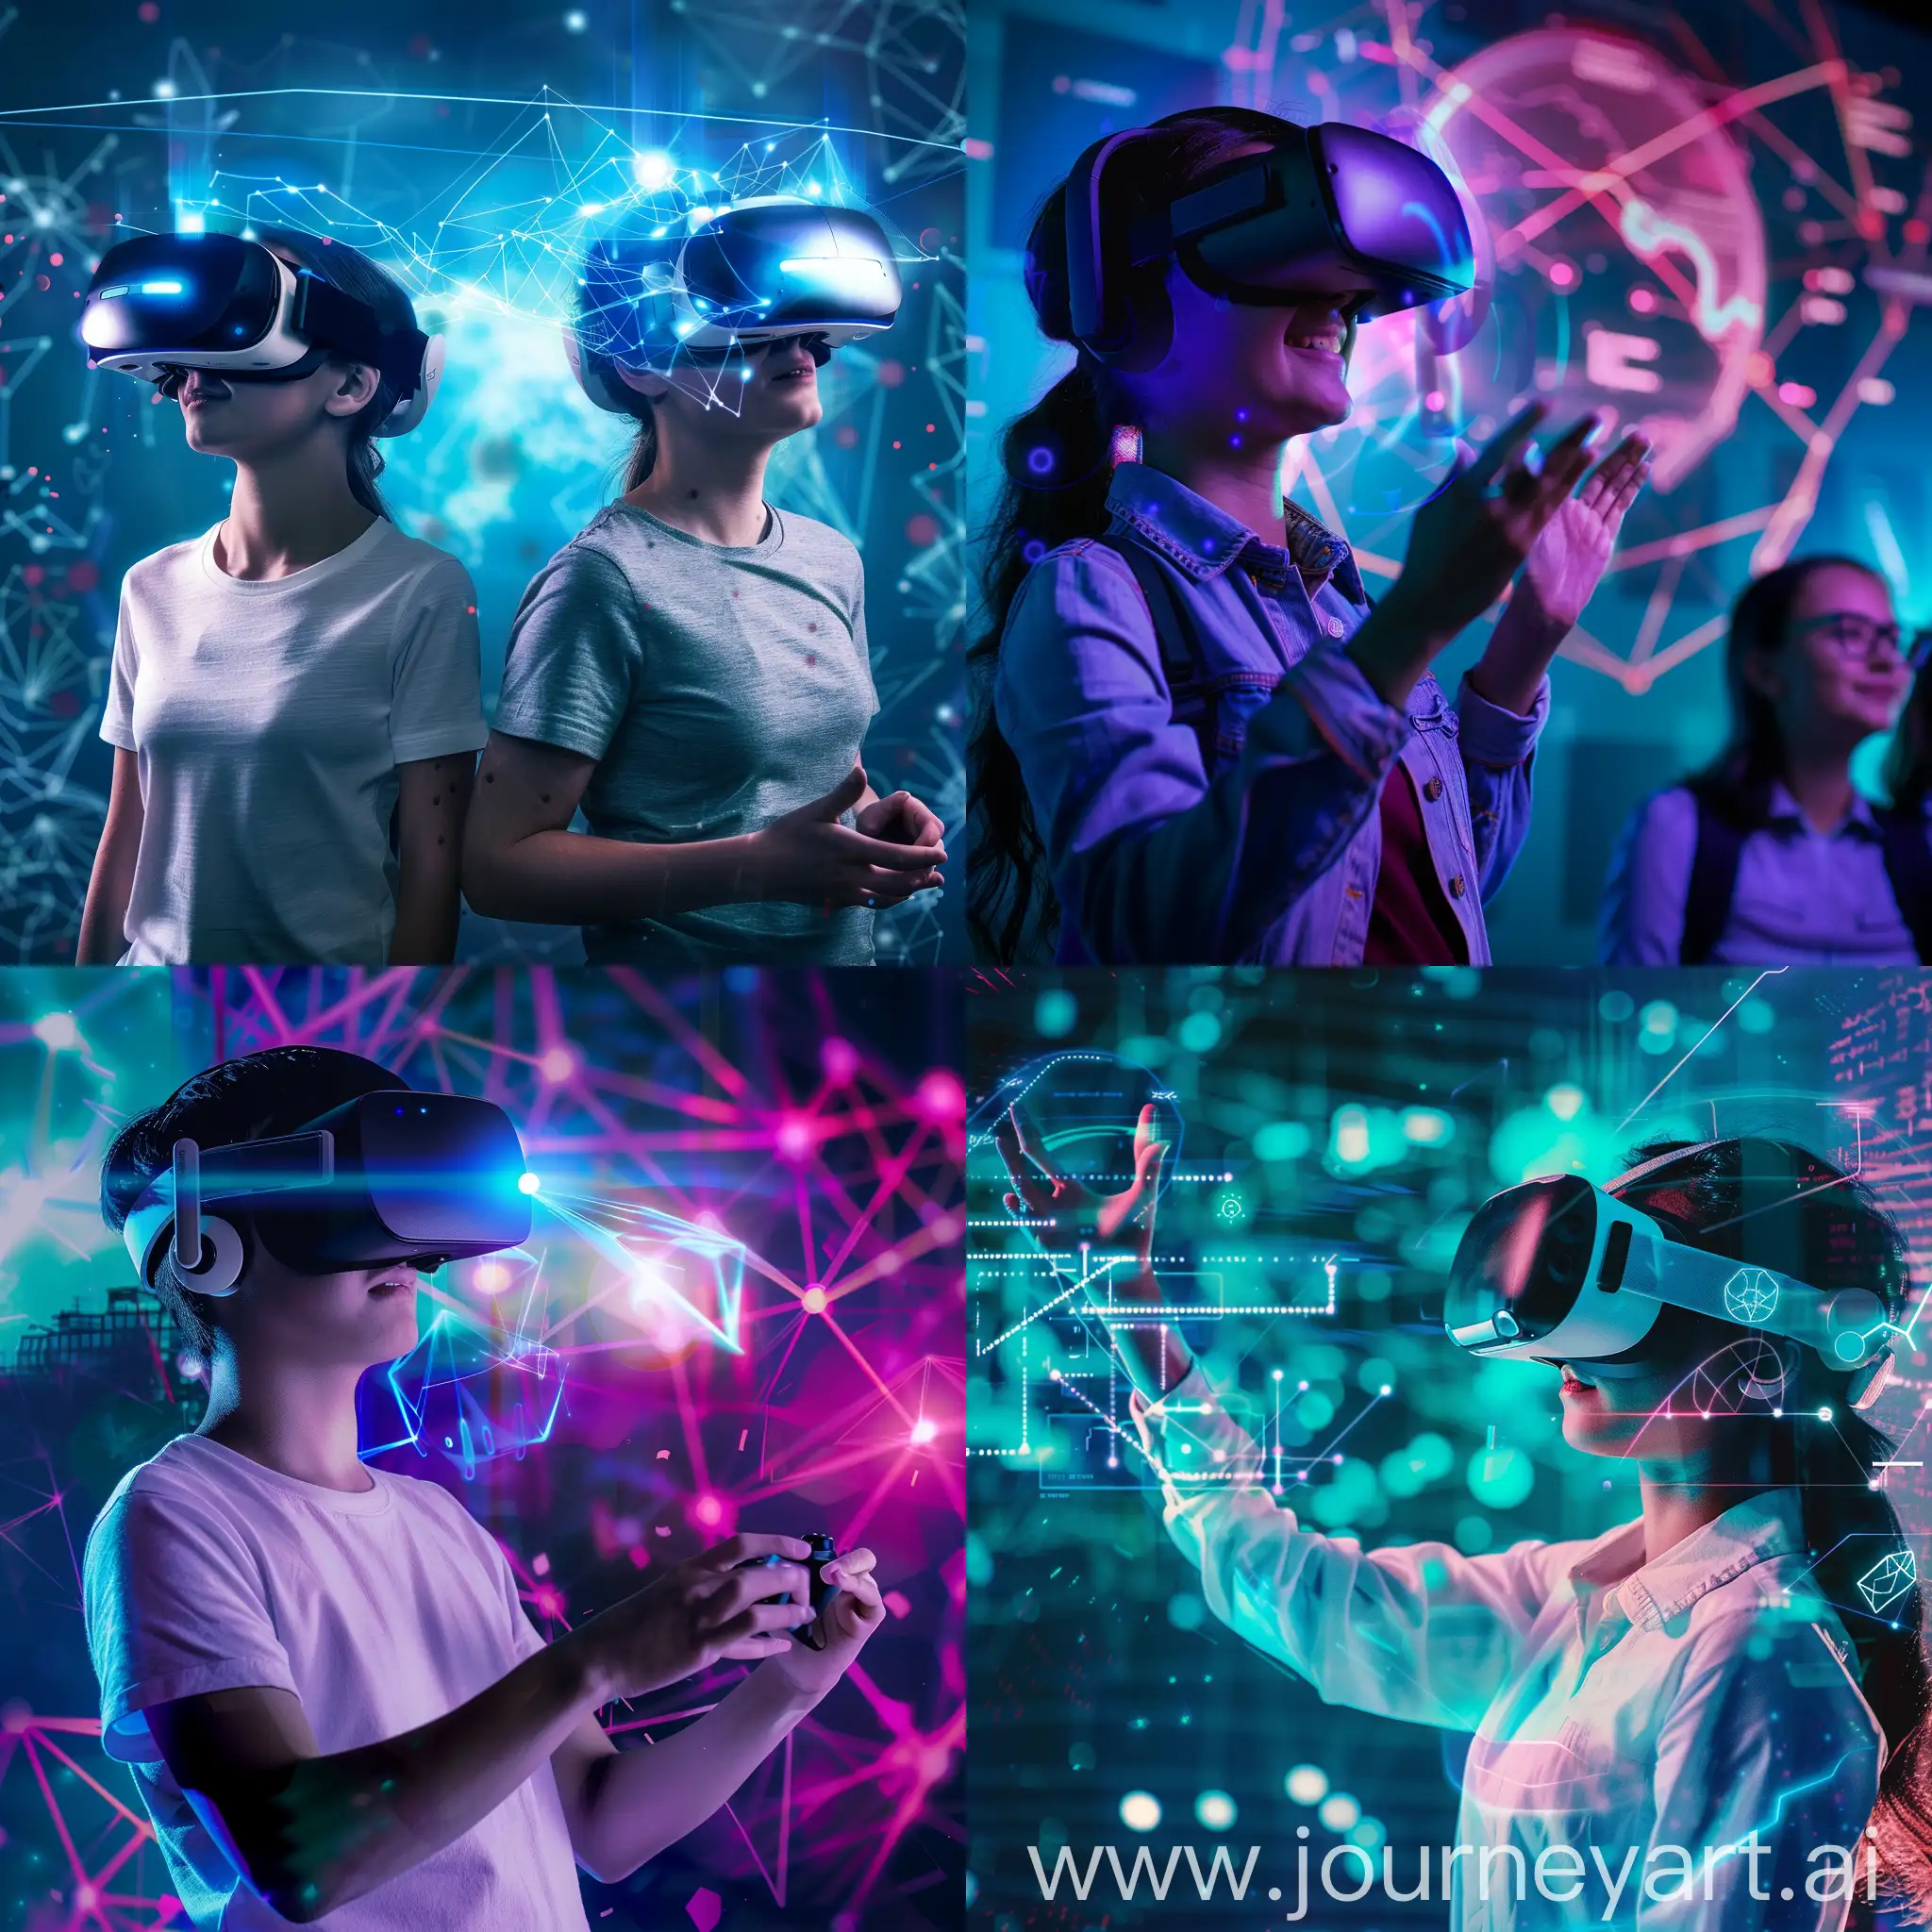 Metaverse-Student-and-Teacher-in-Education-Setting-Without-VR-Headset